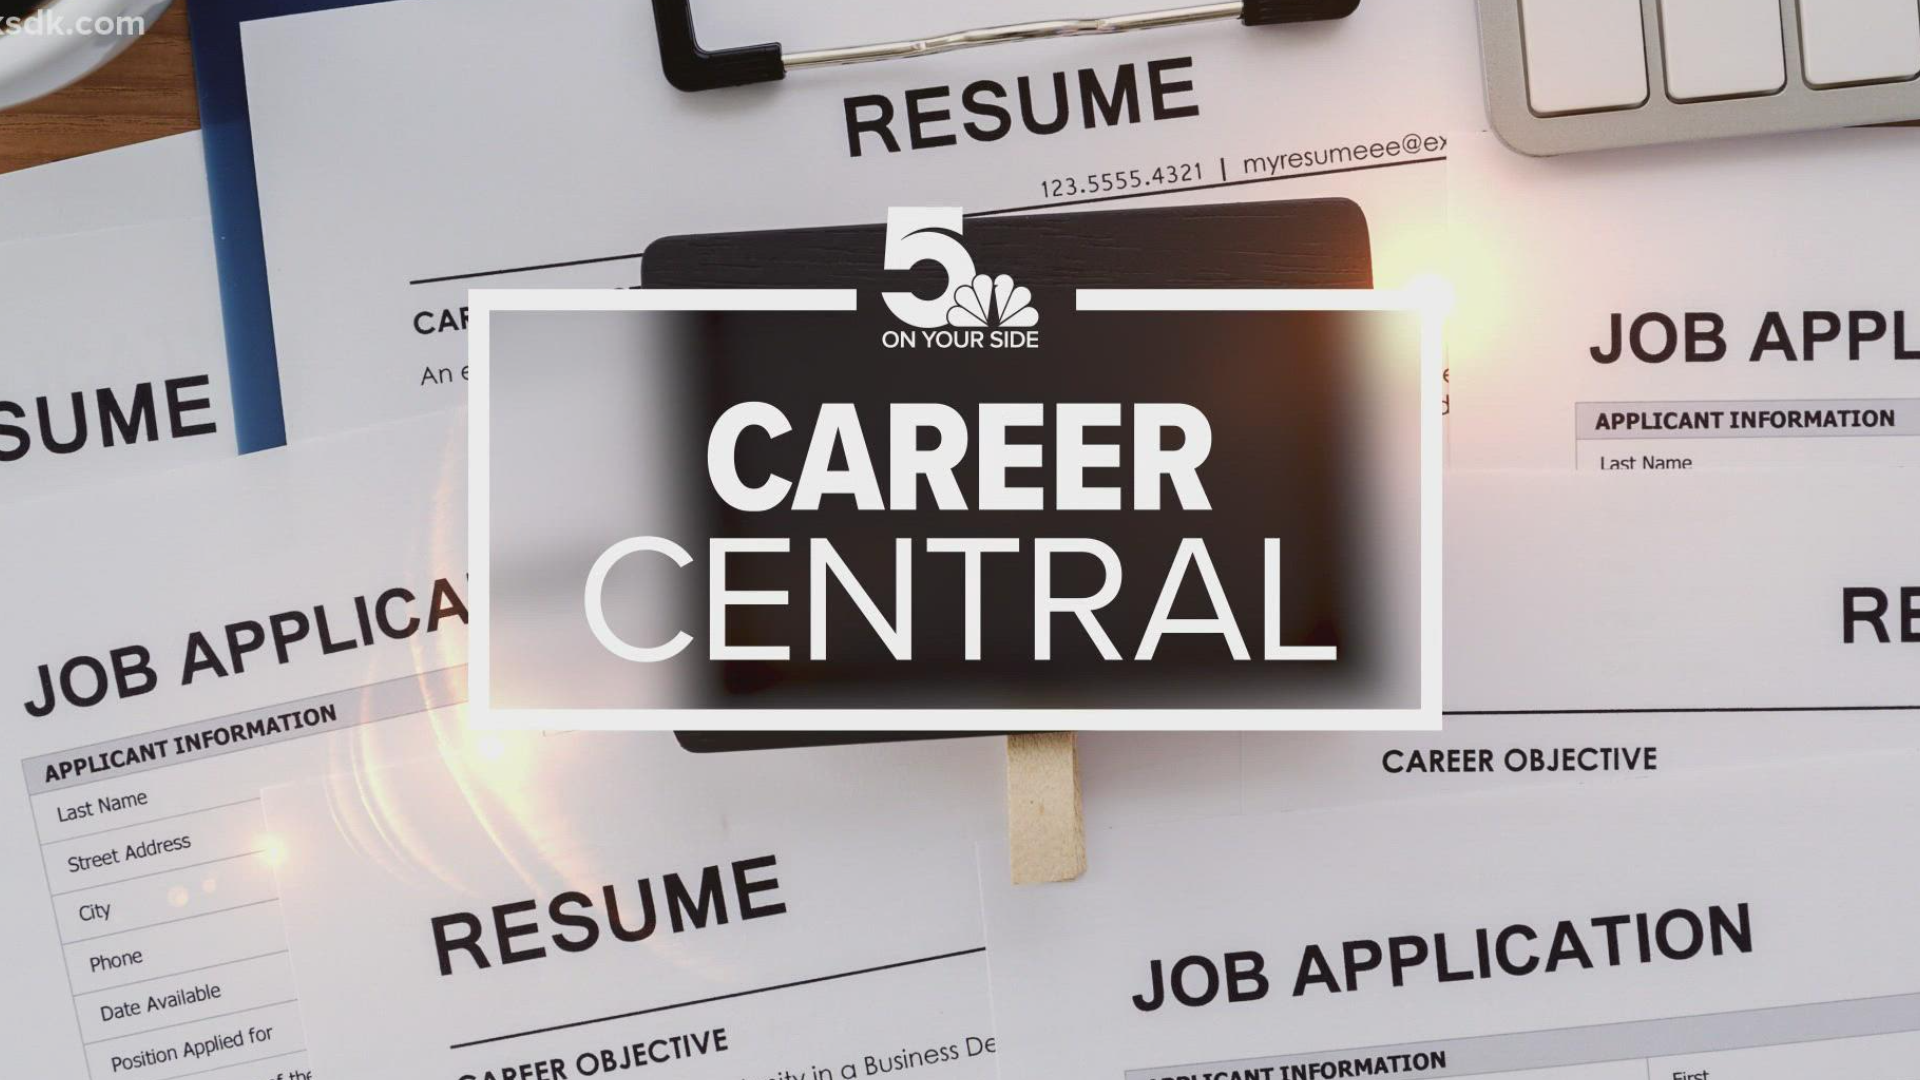 Looking for full or part-time work, for a job for the holidays, or a career to build on? Career Central is ready to connect you to great opportunities!